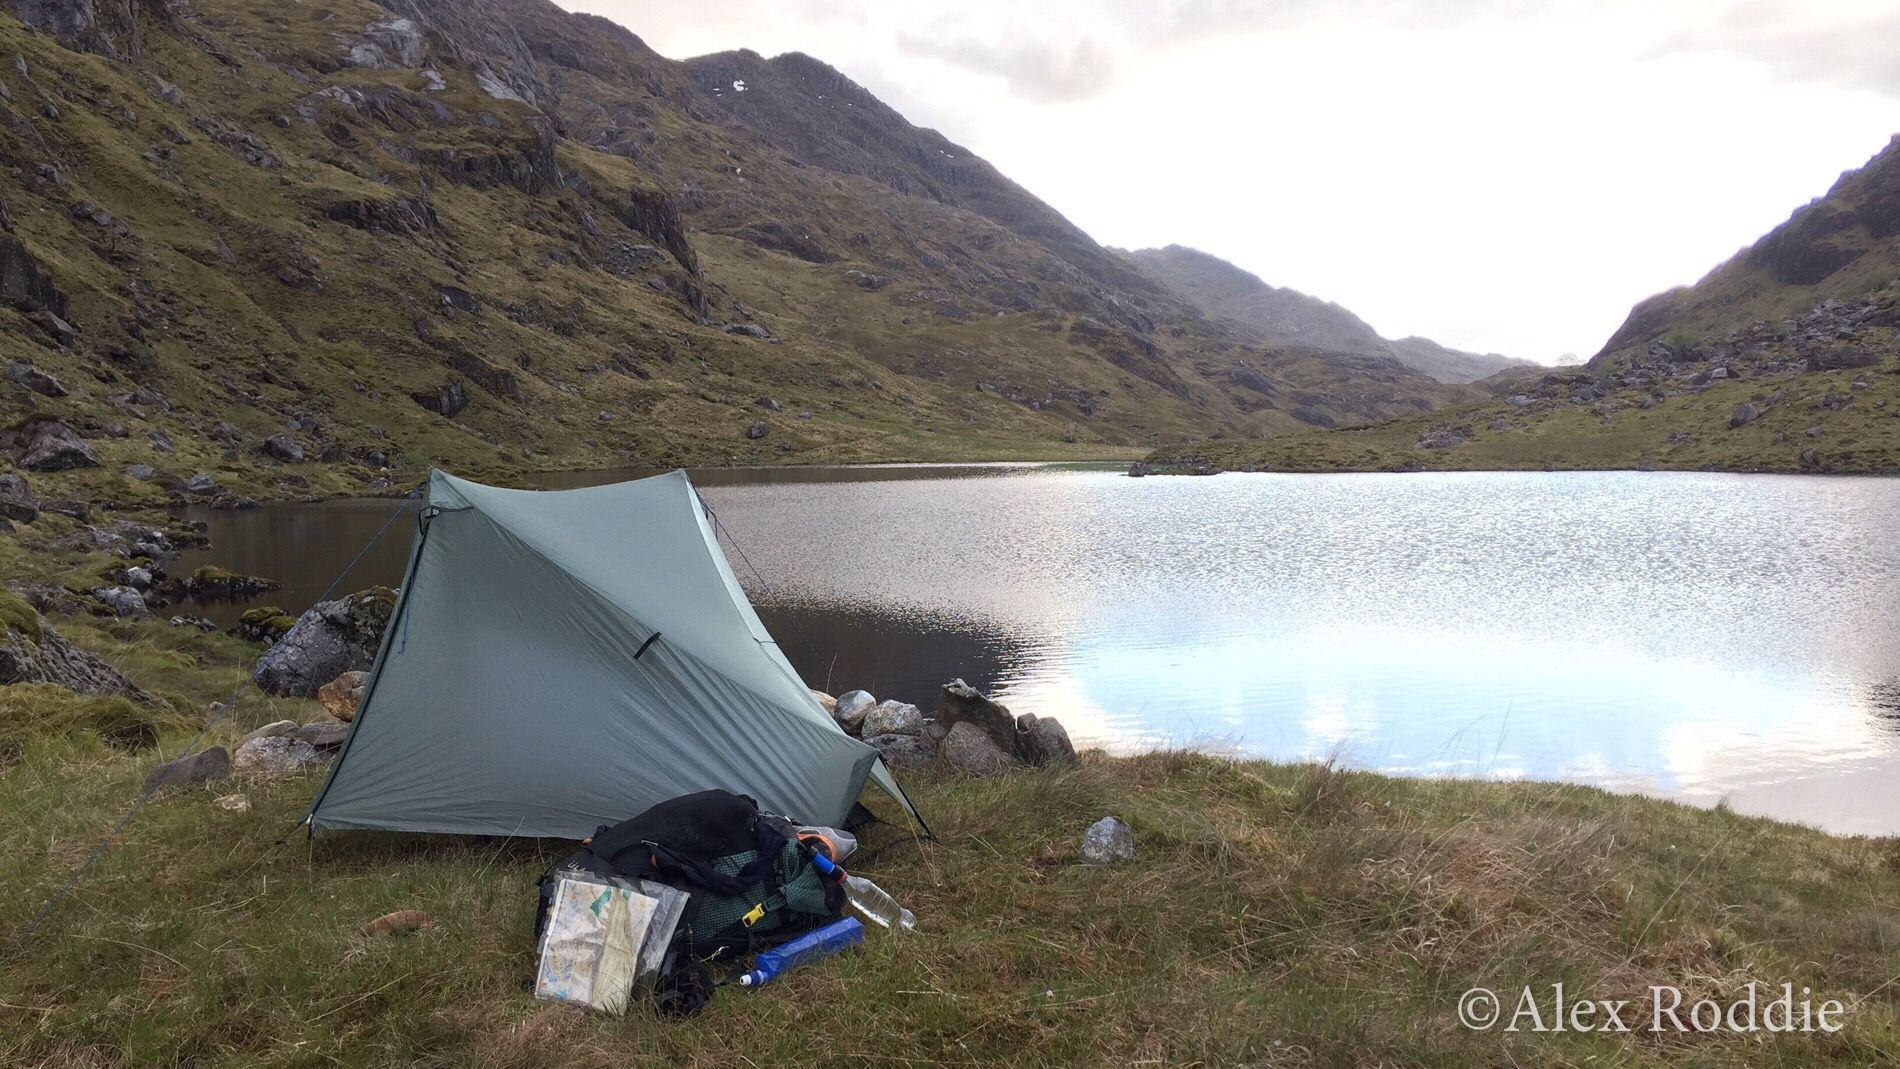 Alex's first wild camp at Lochan a'Mhaim, a few hours before the storm rolled in